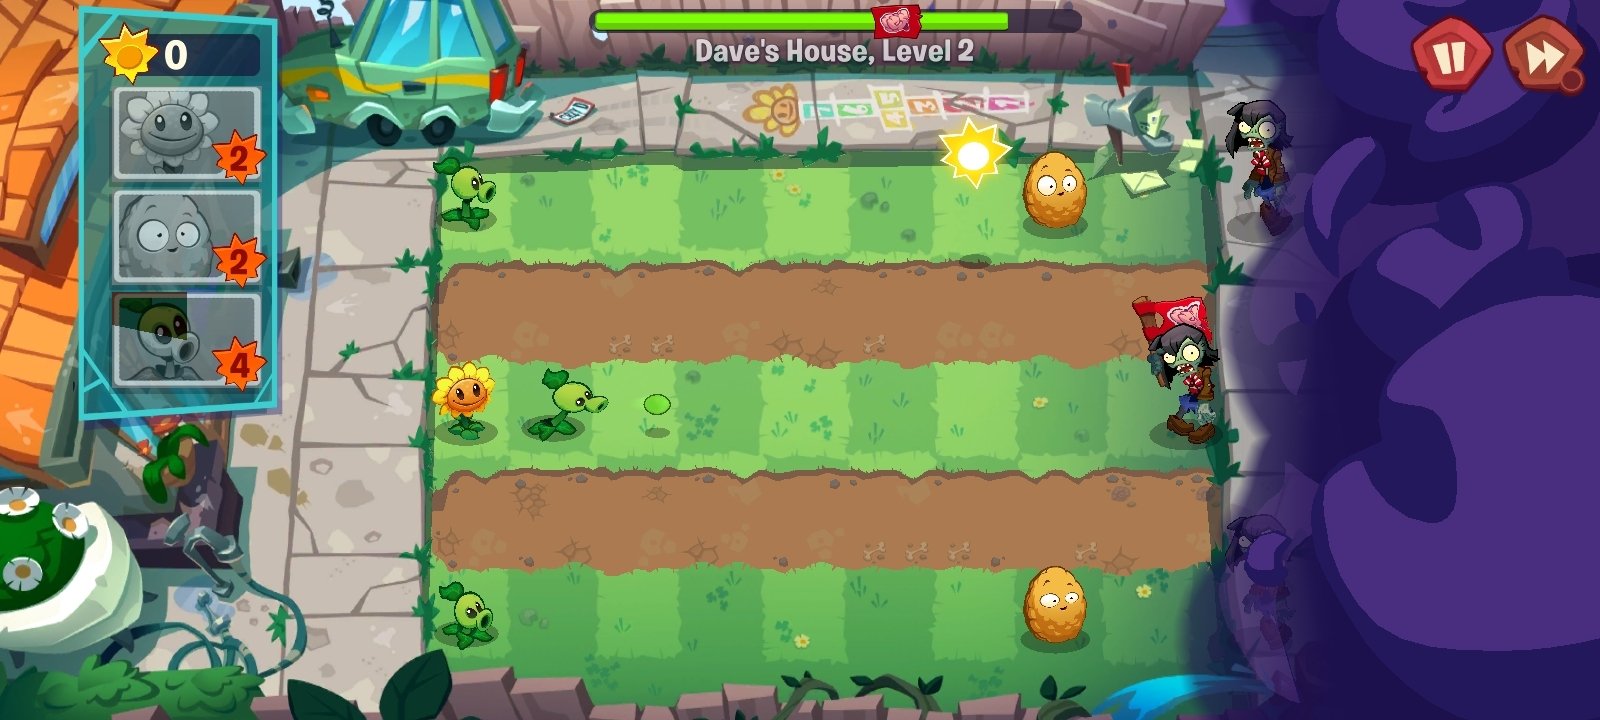 Plants vs. Zombies 3 APK Download for Android Free